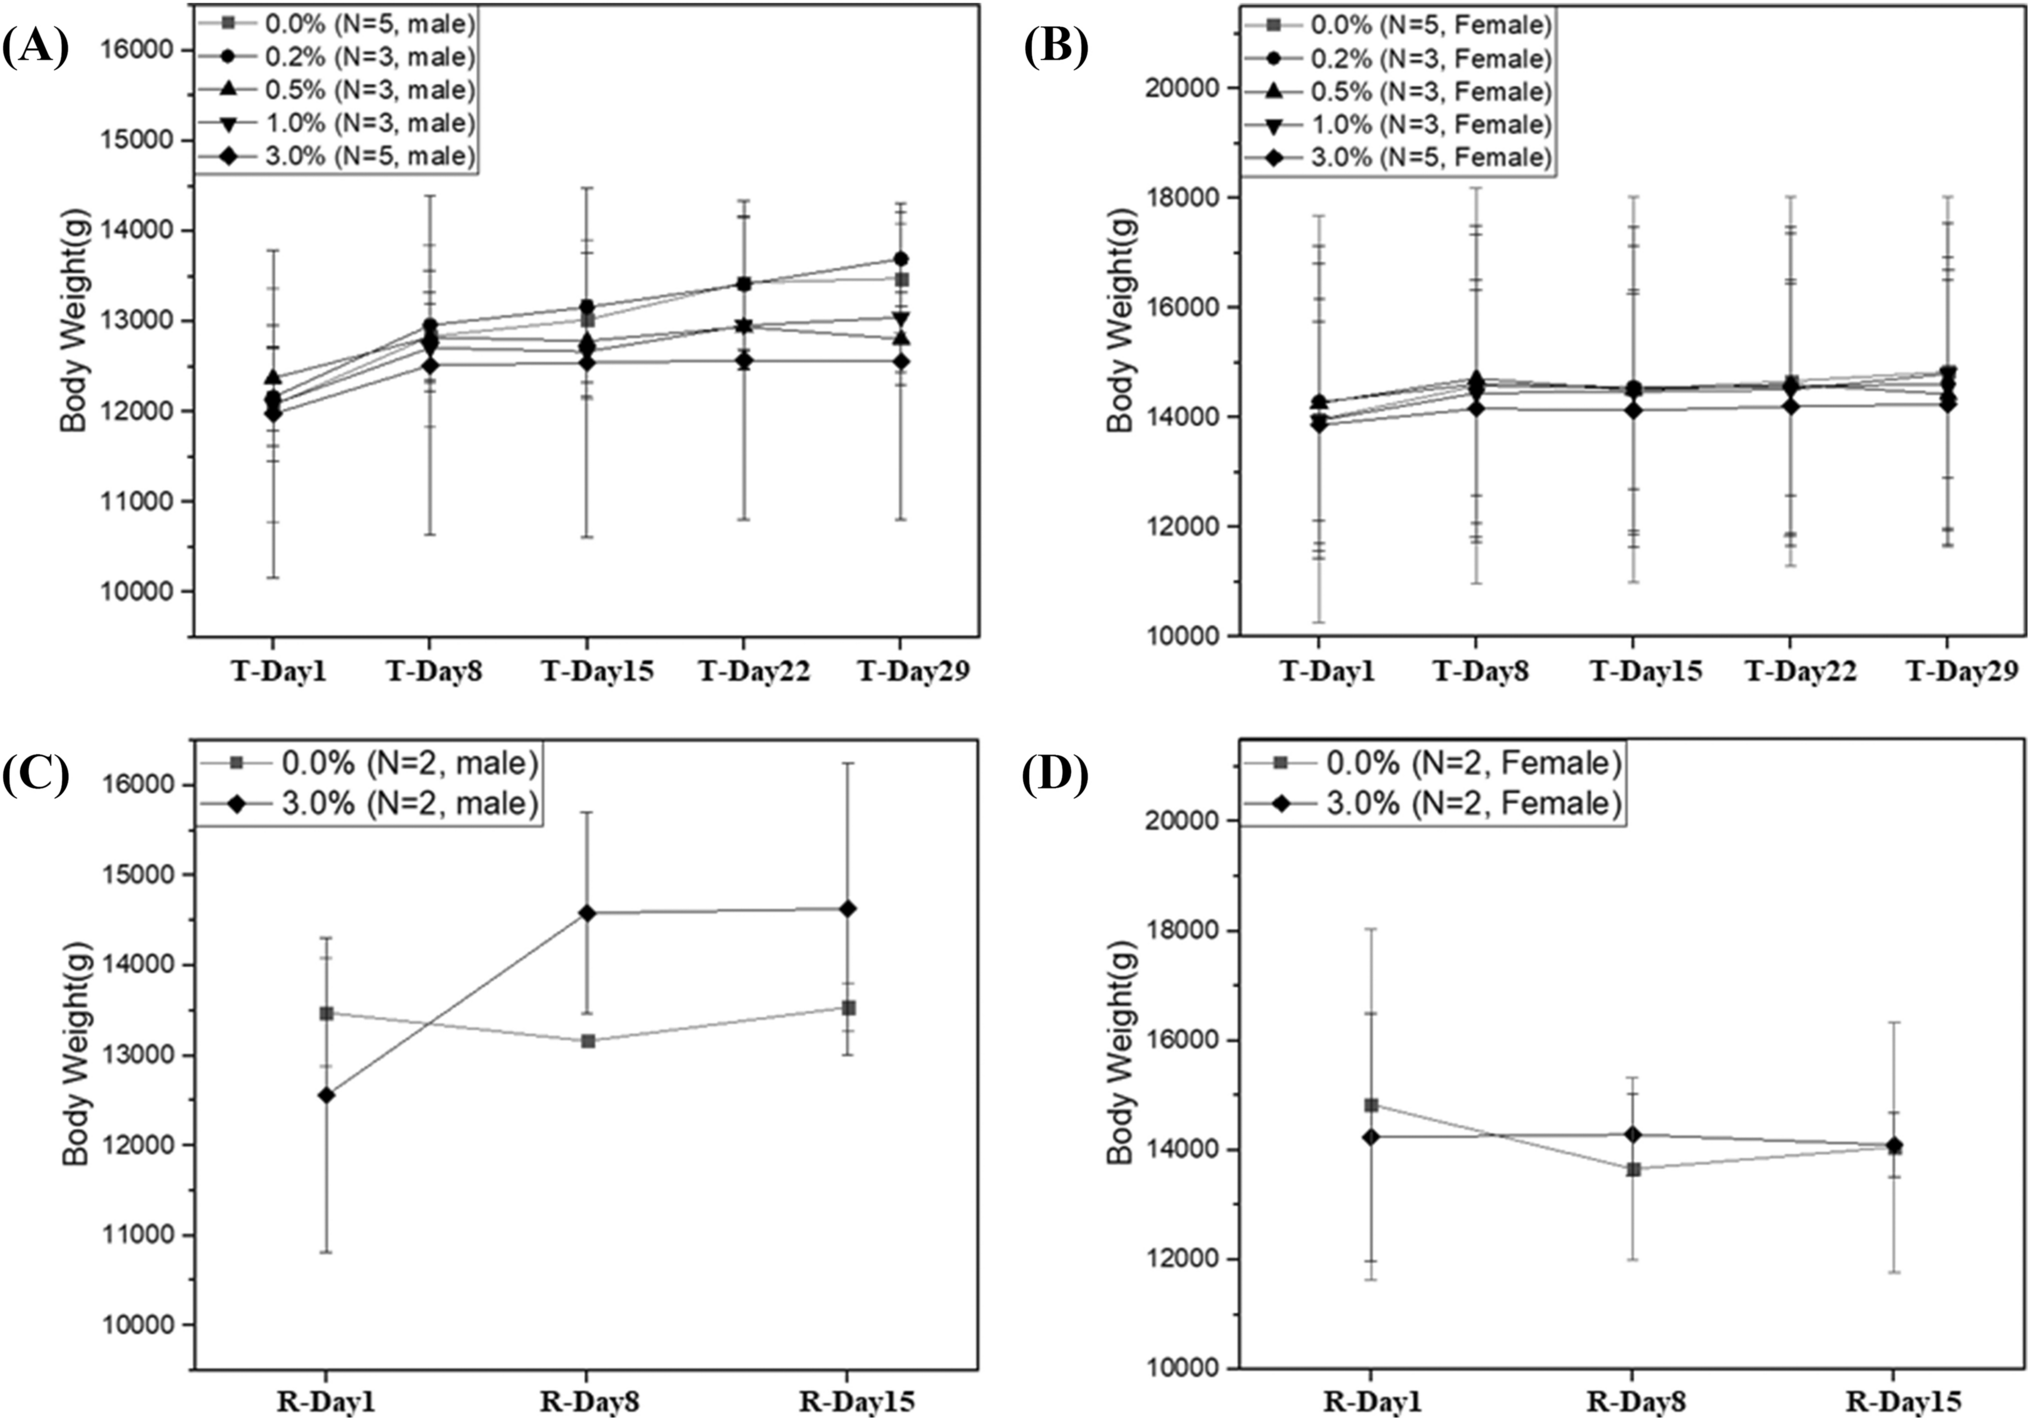 Toxicity of a novel antifungal agent (ATB1651 gel) in Yucatan minipigs (Sus scrofa) following 4 weeks of daily dermal administration